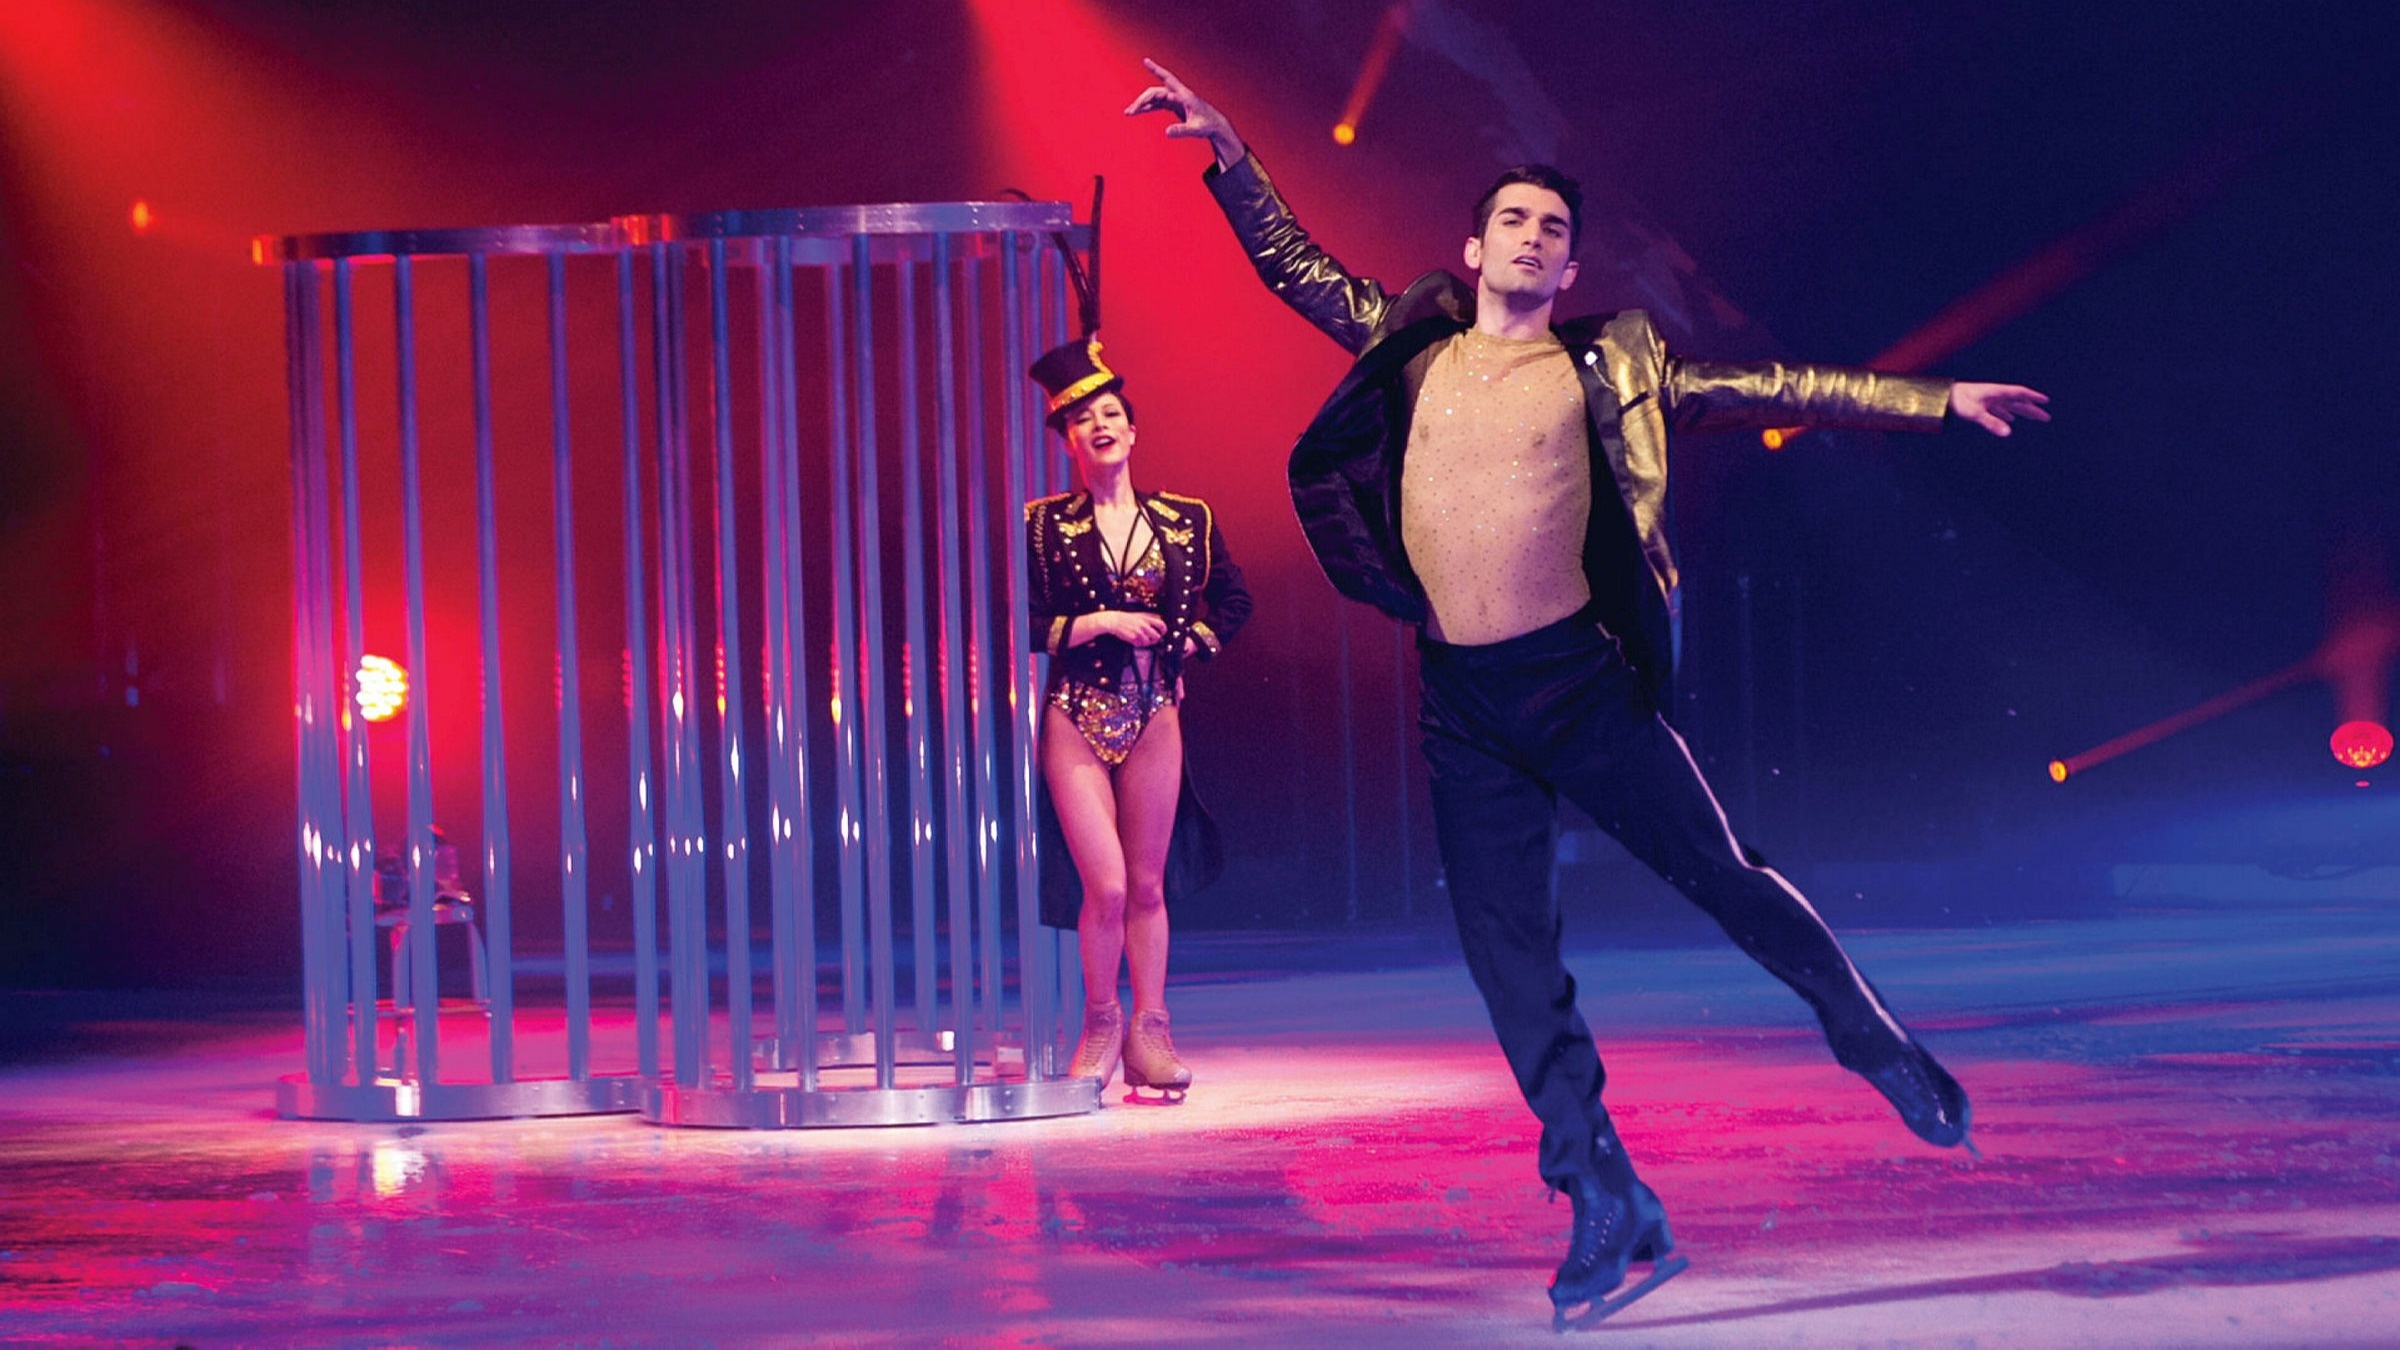 Ice Theatre: Mauro Bruni, MBA, BFA, Holiday on Ice Show, UK Star Performer, Medusa Music Group, House of Mauro Productions. 2400x1350 HD Wallpaper.